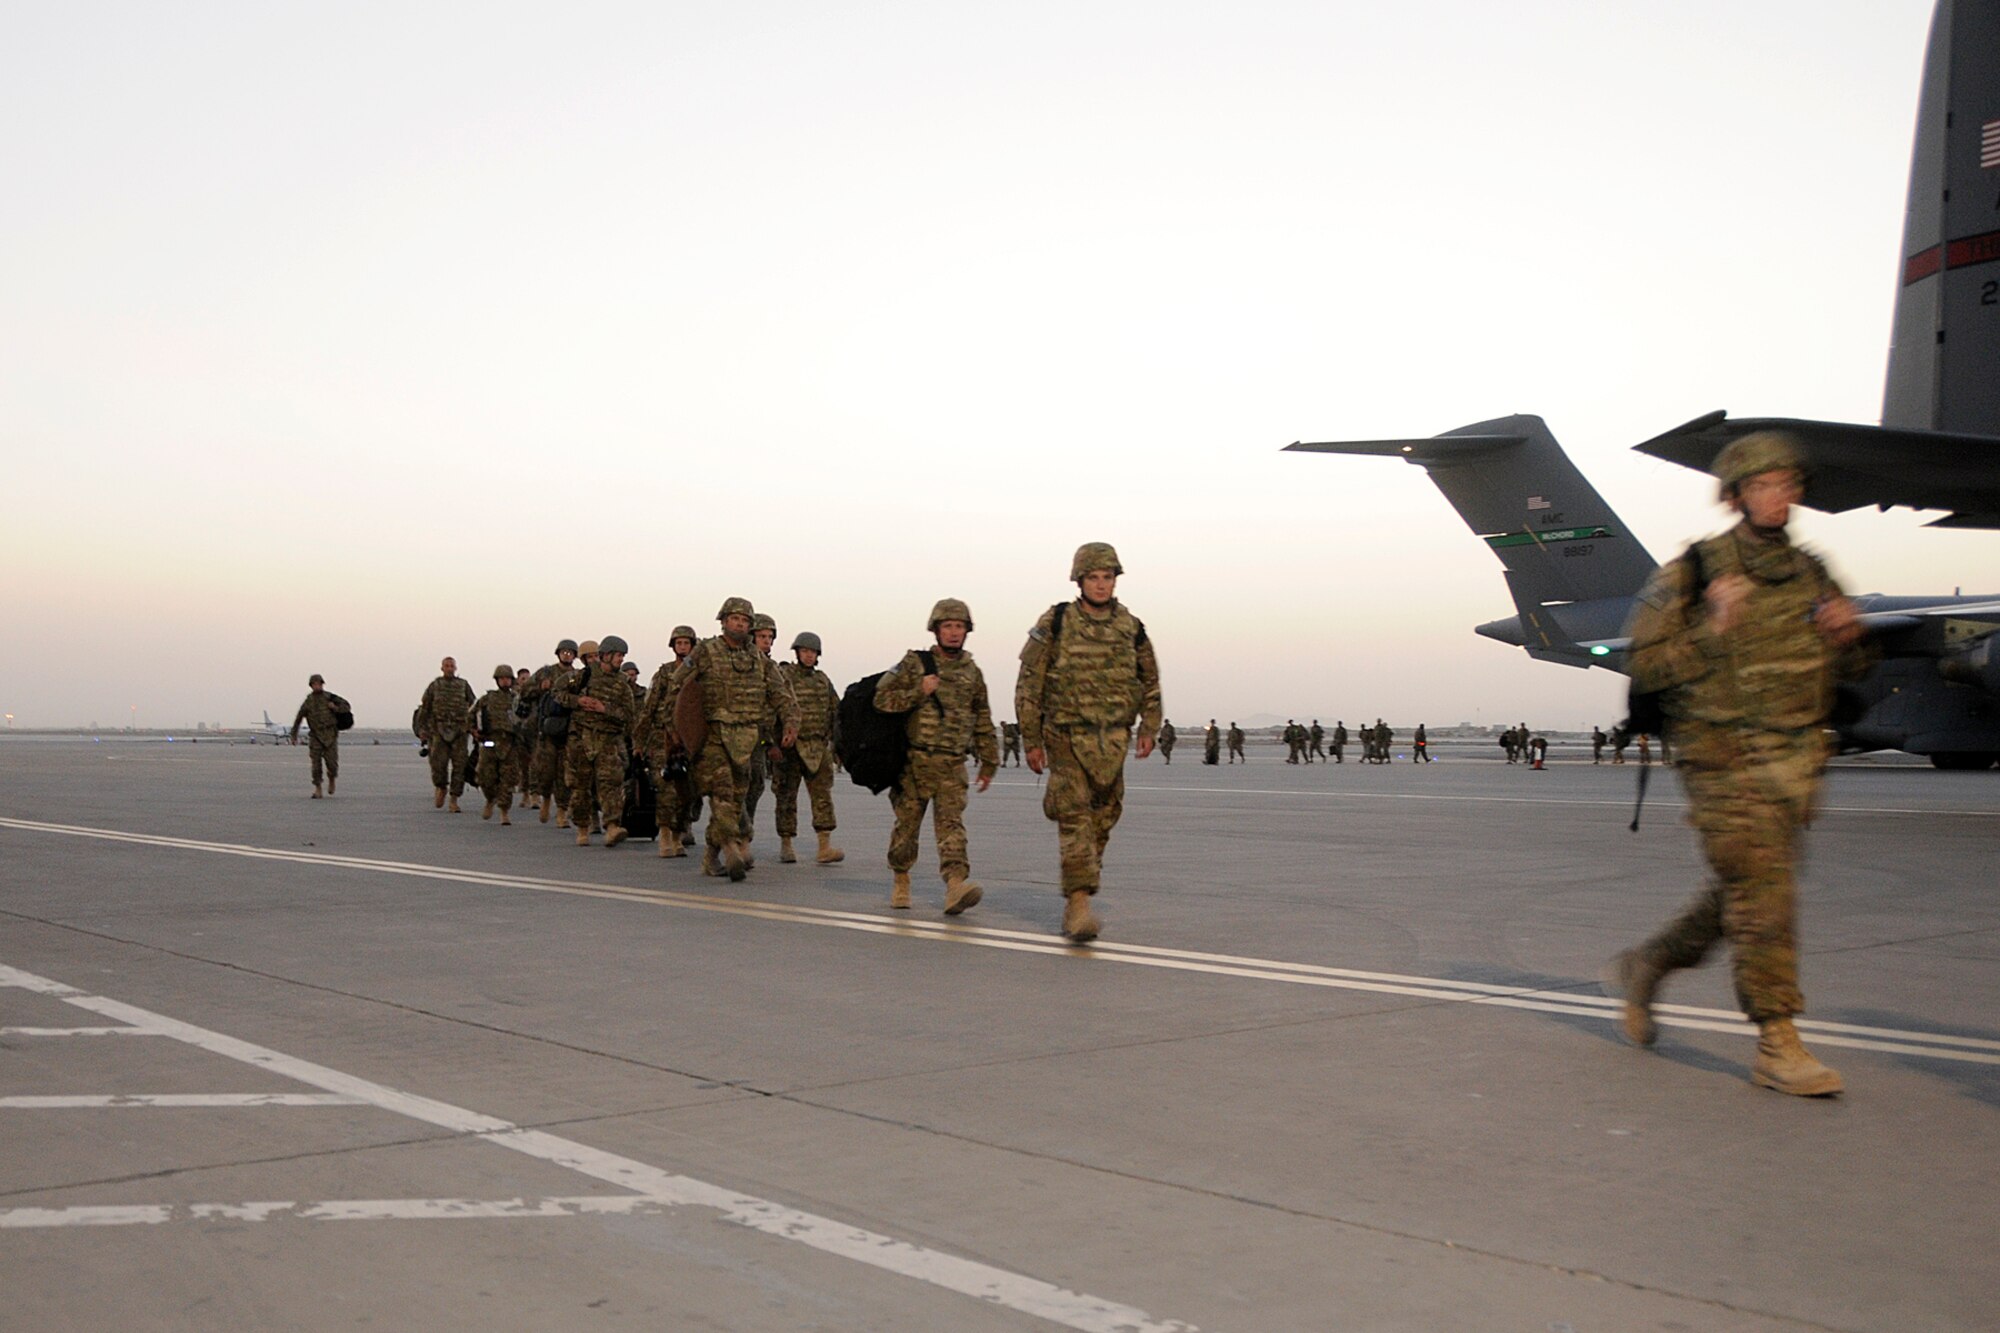 Airmen from the Minnesota Air National Guard disembark a C-17 on the ramp at Kandahar Airfield, Afghanistan, on Aug. 10, 2012. Personnel are deployed from the Minnesota Air National Guard's 148th Fighter Wing in support of Operation Enduring Freedom. Bull Dog F-16’s, pilots, and support personnel began their Air Expeditionary Force deployment in mid-August to take over flying missions for the air tasking order and provide close air support for troops on the ground in Afghanistan.  (Air Force photo by Tech. Sgt. Stephen Hudson, 169th Fighter Wing/Public Affairs.)